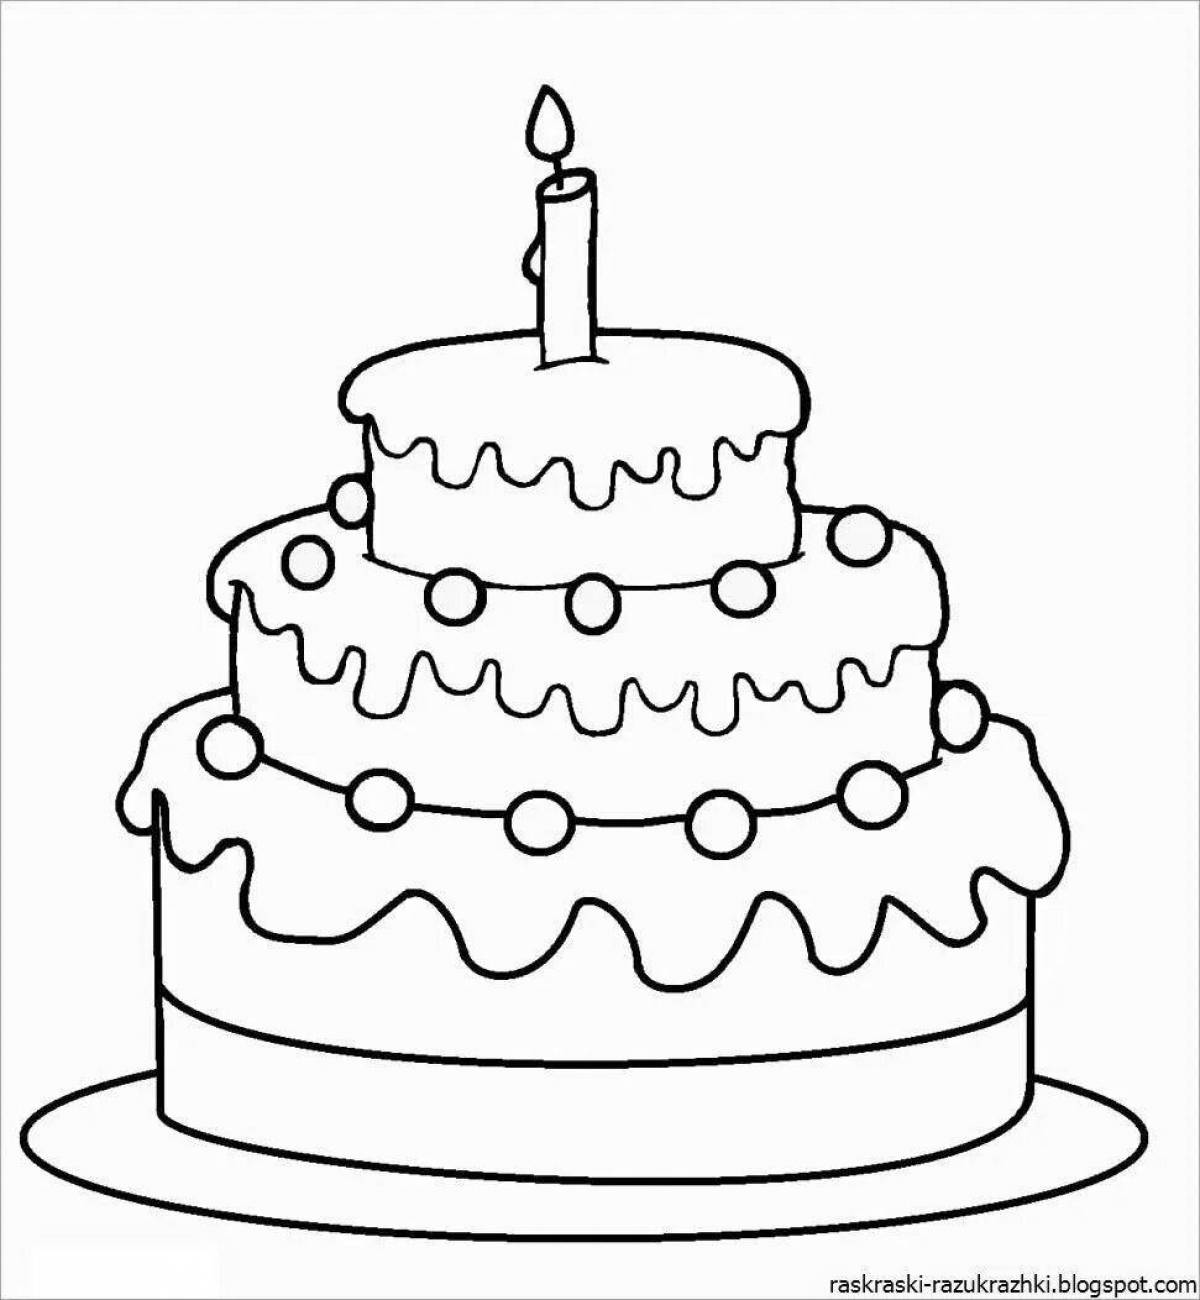 Birthday cake coloring book for kids